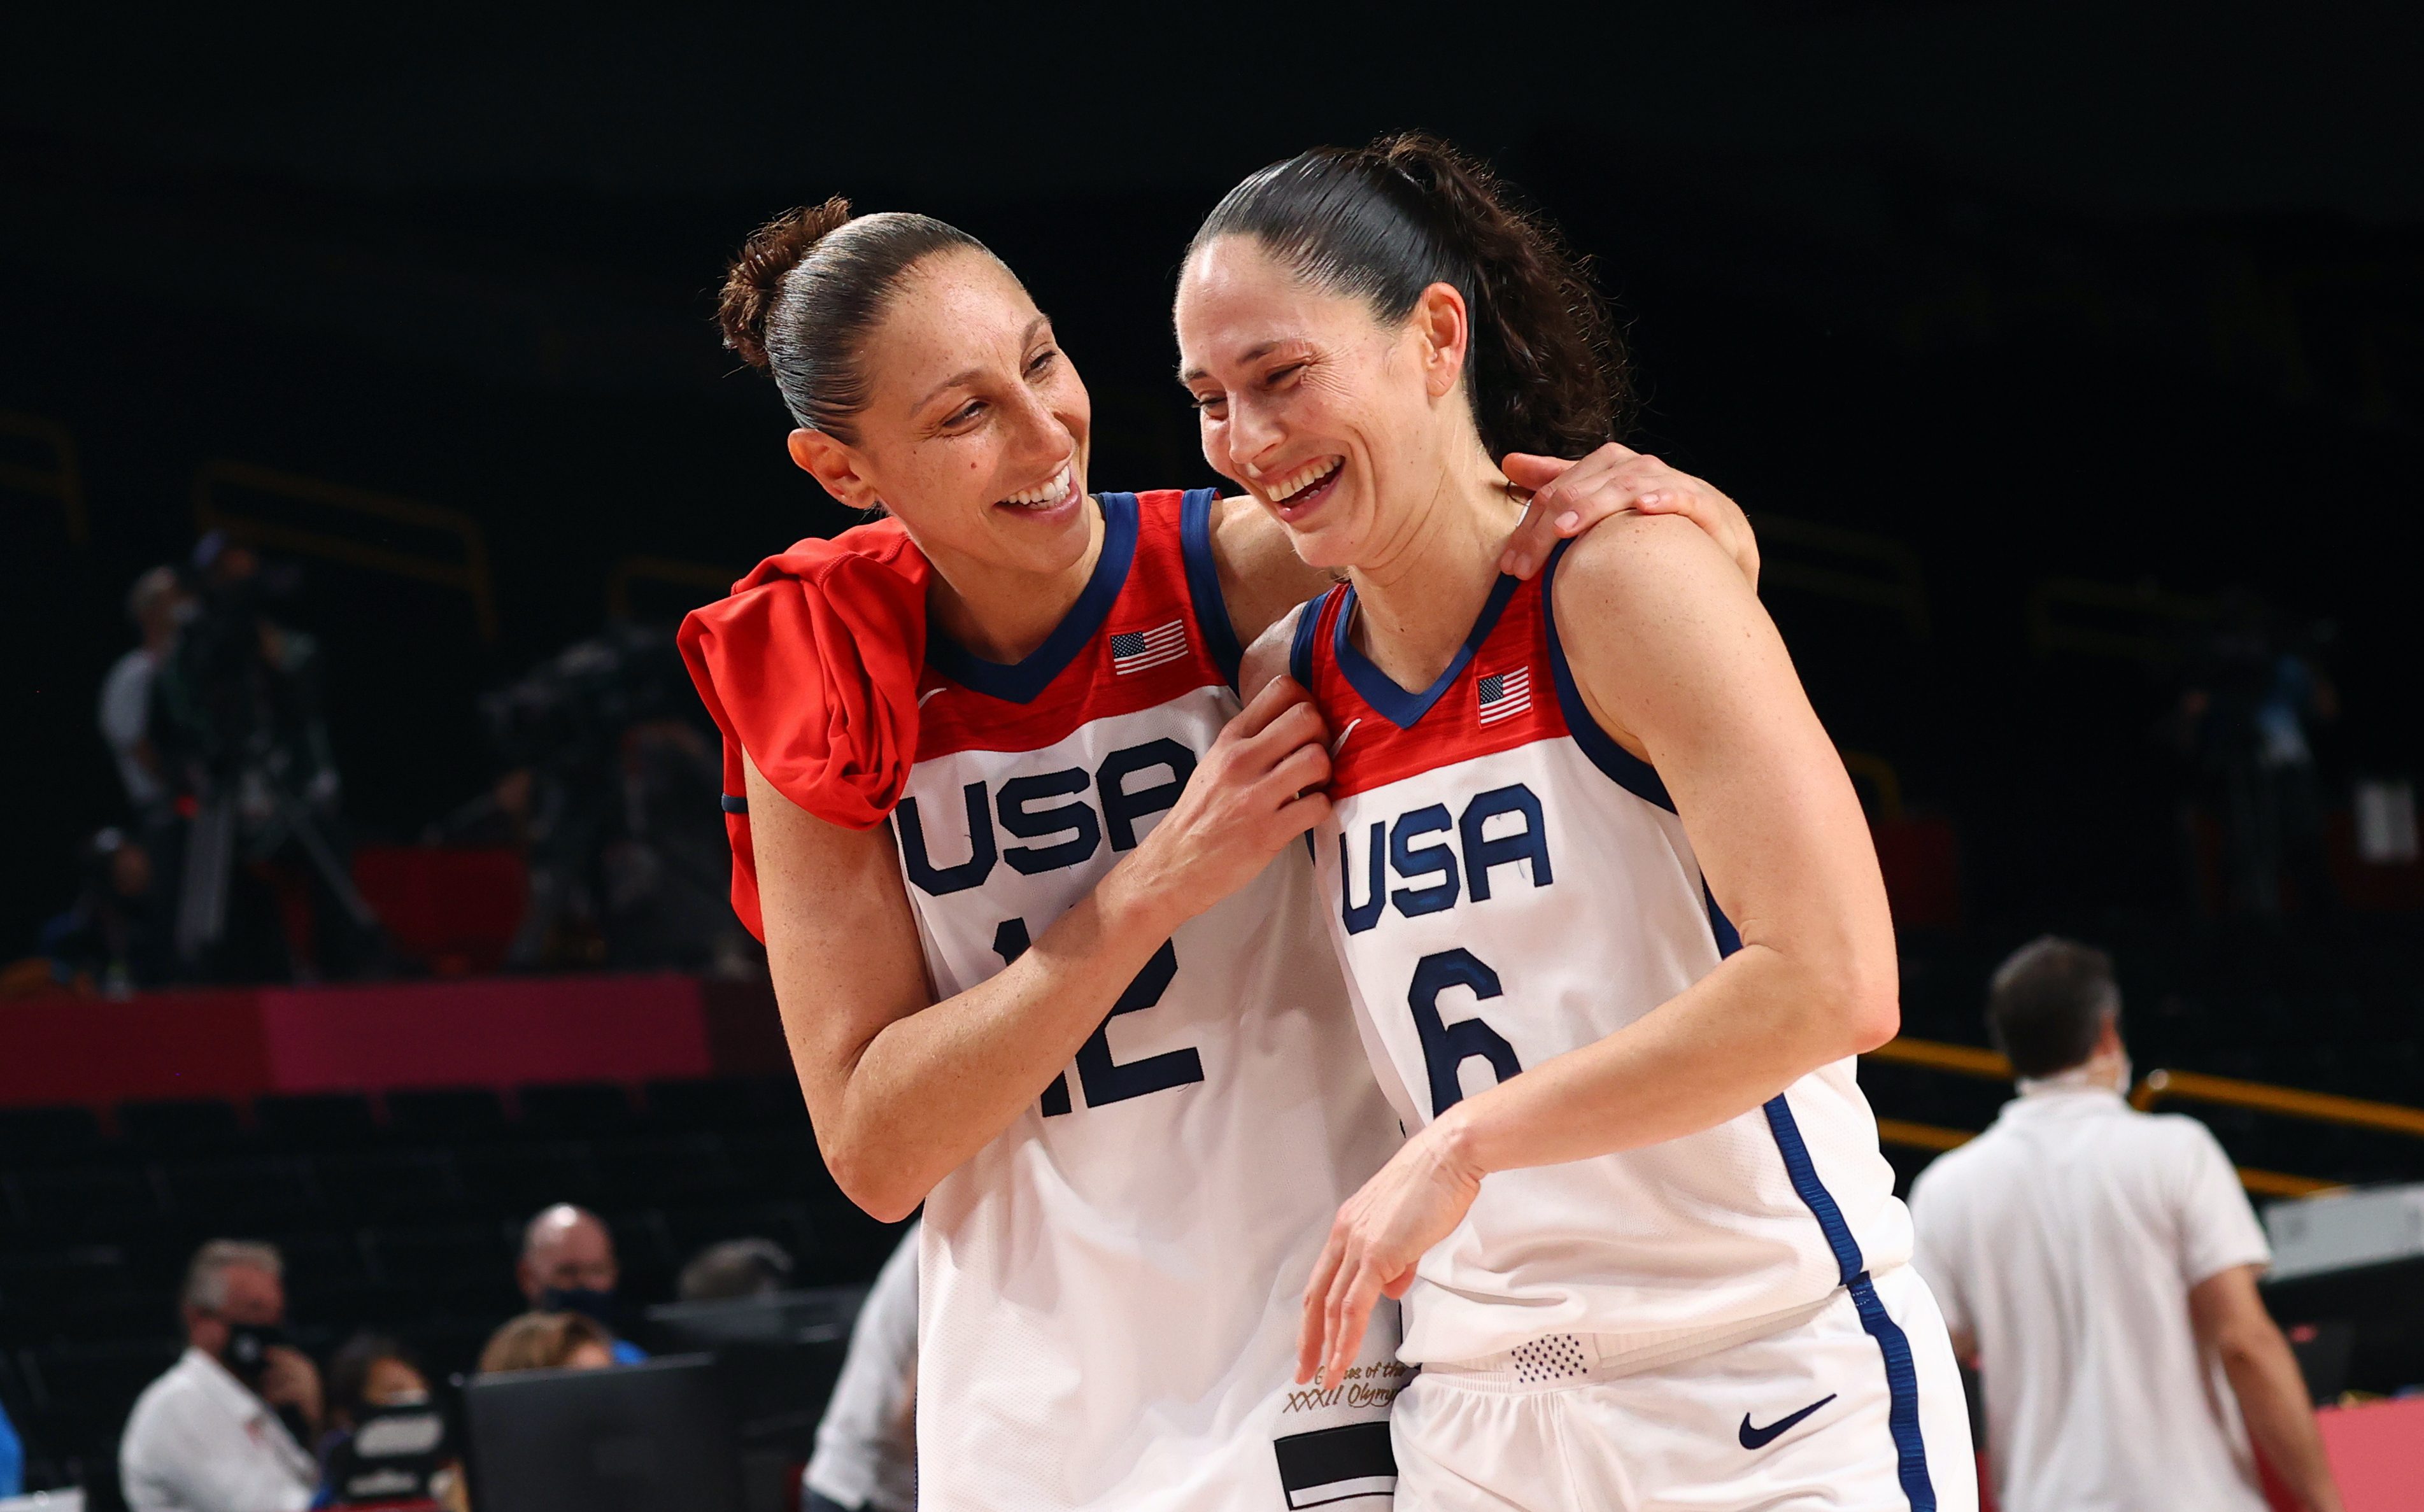 Team USA routs Japan to win 7th straight Olympic women’s basketball gold